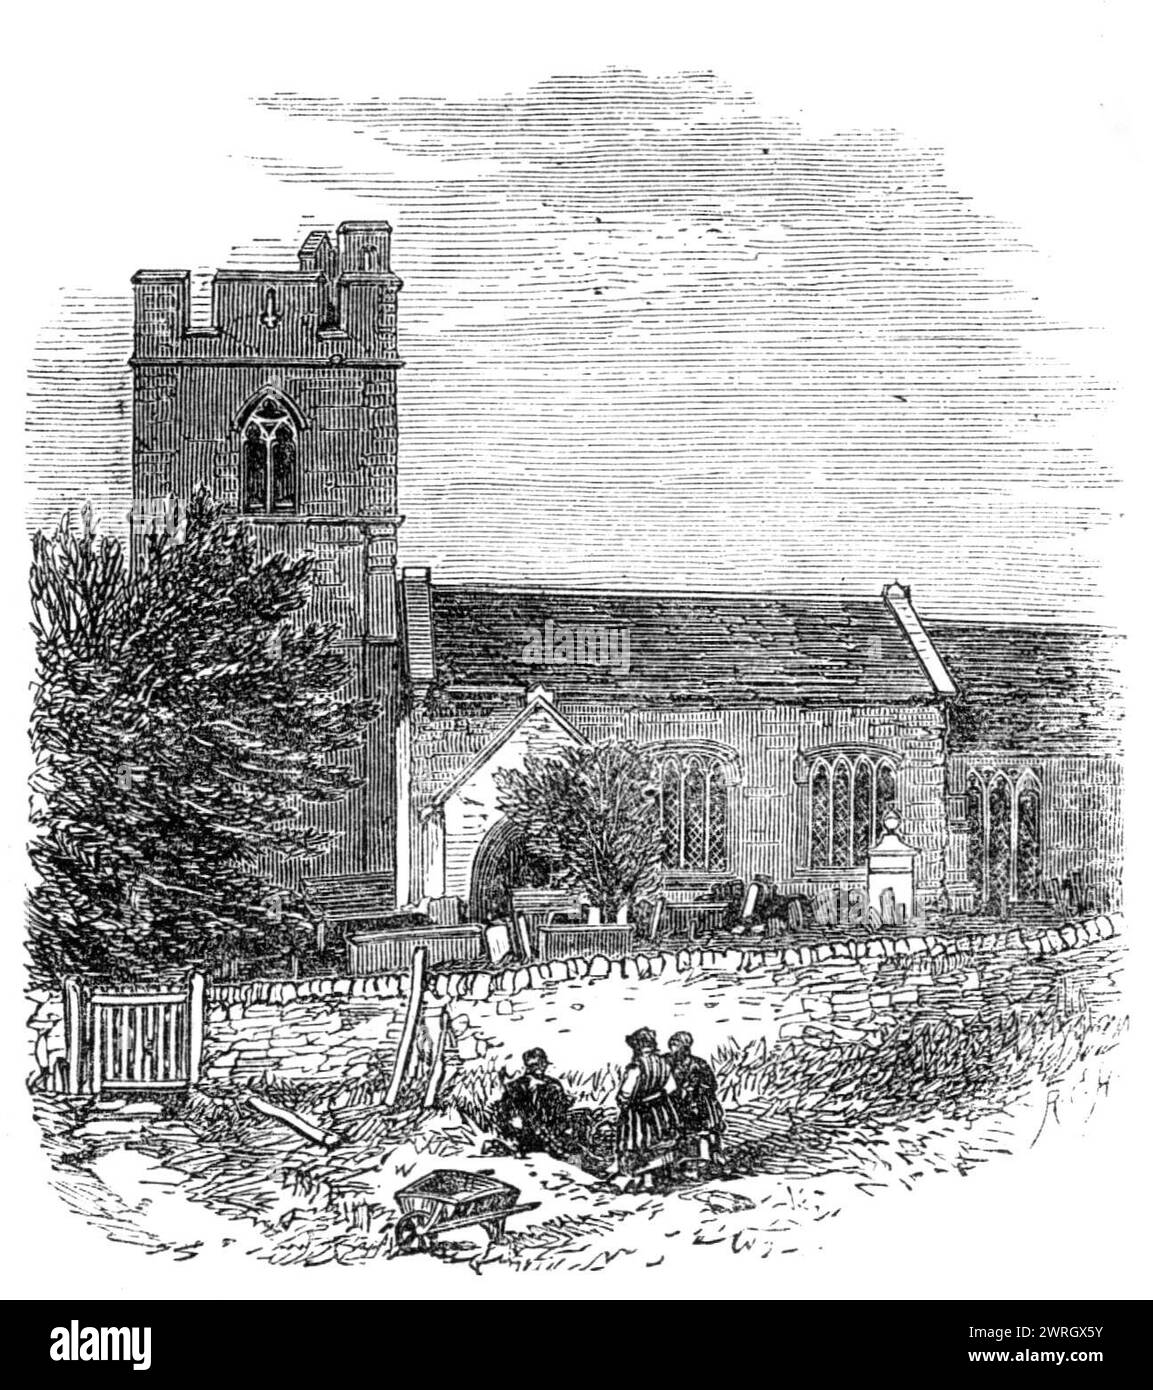 https://c8.alamy.com/comp/2WRGX5Y/old-radnor-church-the-burial-place-of-sir-g-c-lewis-1864-view-of-st-stephens-church-family-burial-place-of-the-late-sir-george-cornewall-lewis-where-he-was-interred-a-few-months-ago-the-church-was-constructed-in-the-15th-century-in-perpendicular-gothic-style-on-the-site-of-a-6th-century-church-from-quotillustrated-london-newsquot-1864-2WRGX5Y.jpg